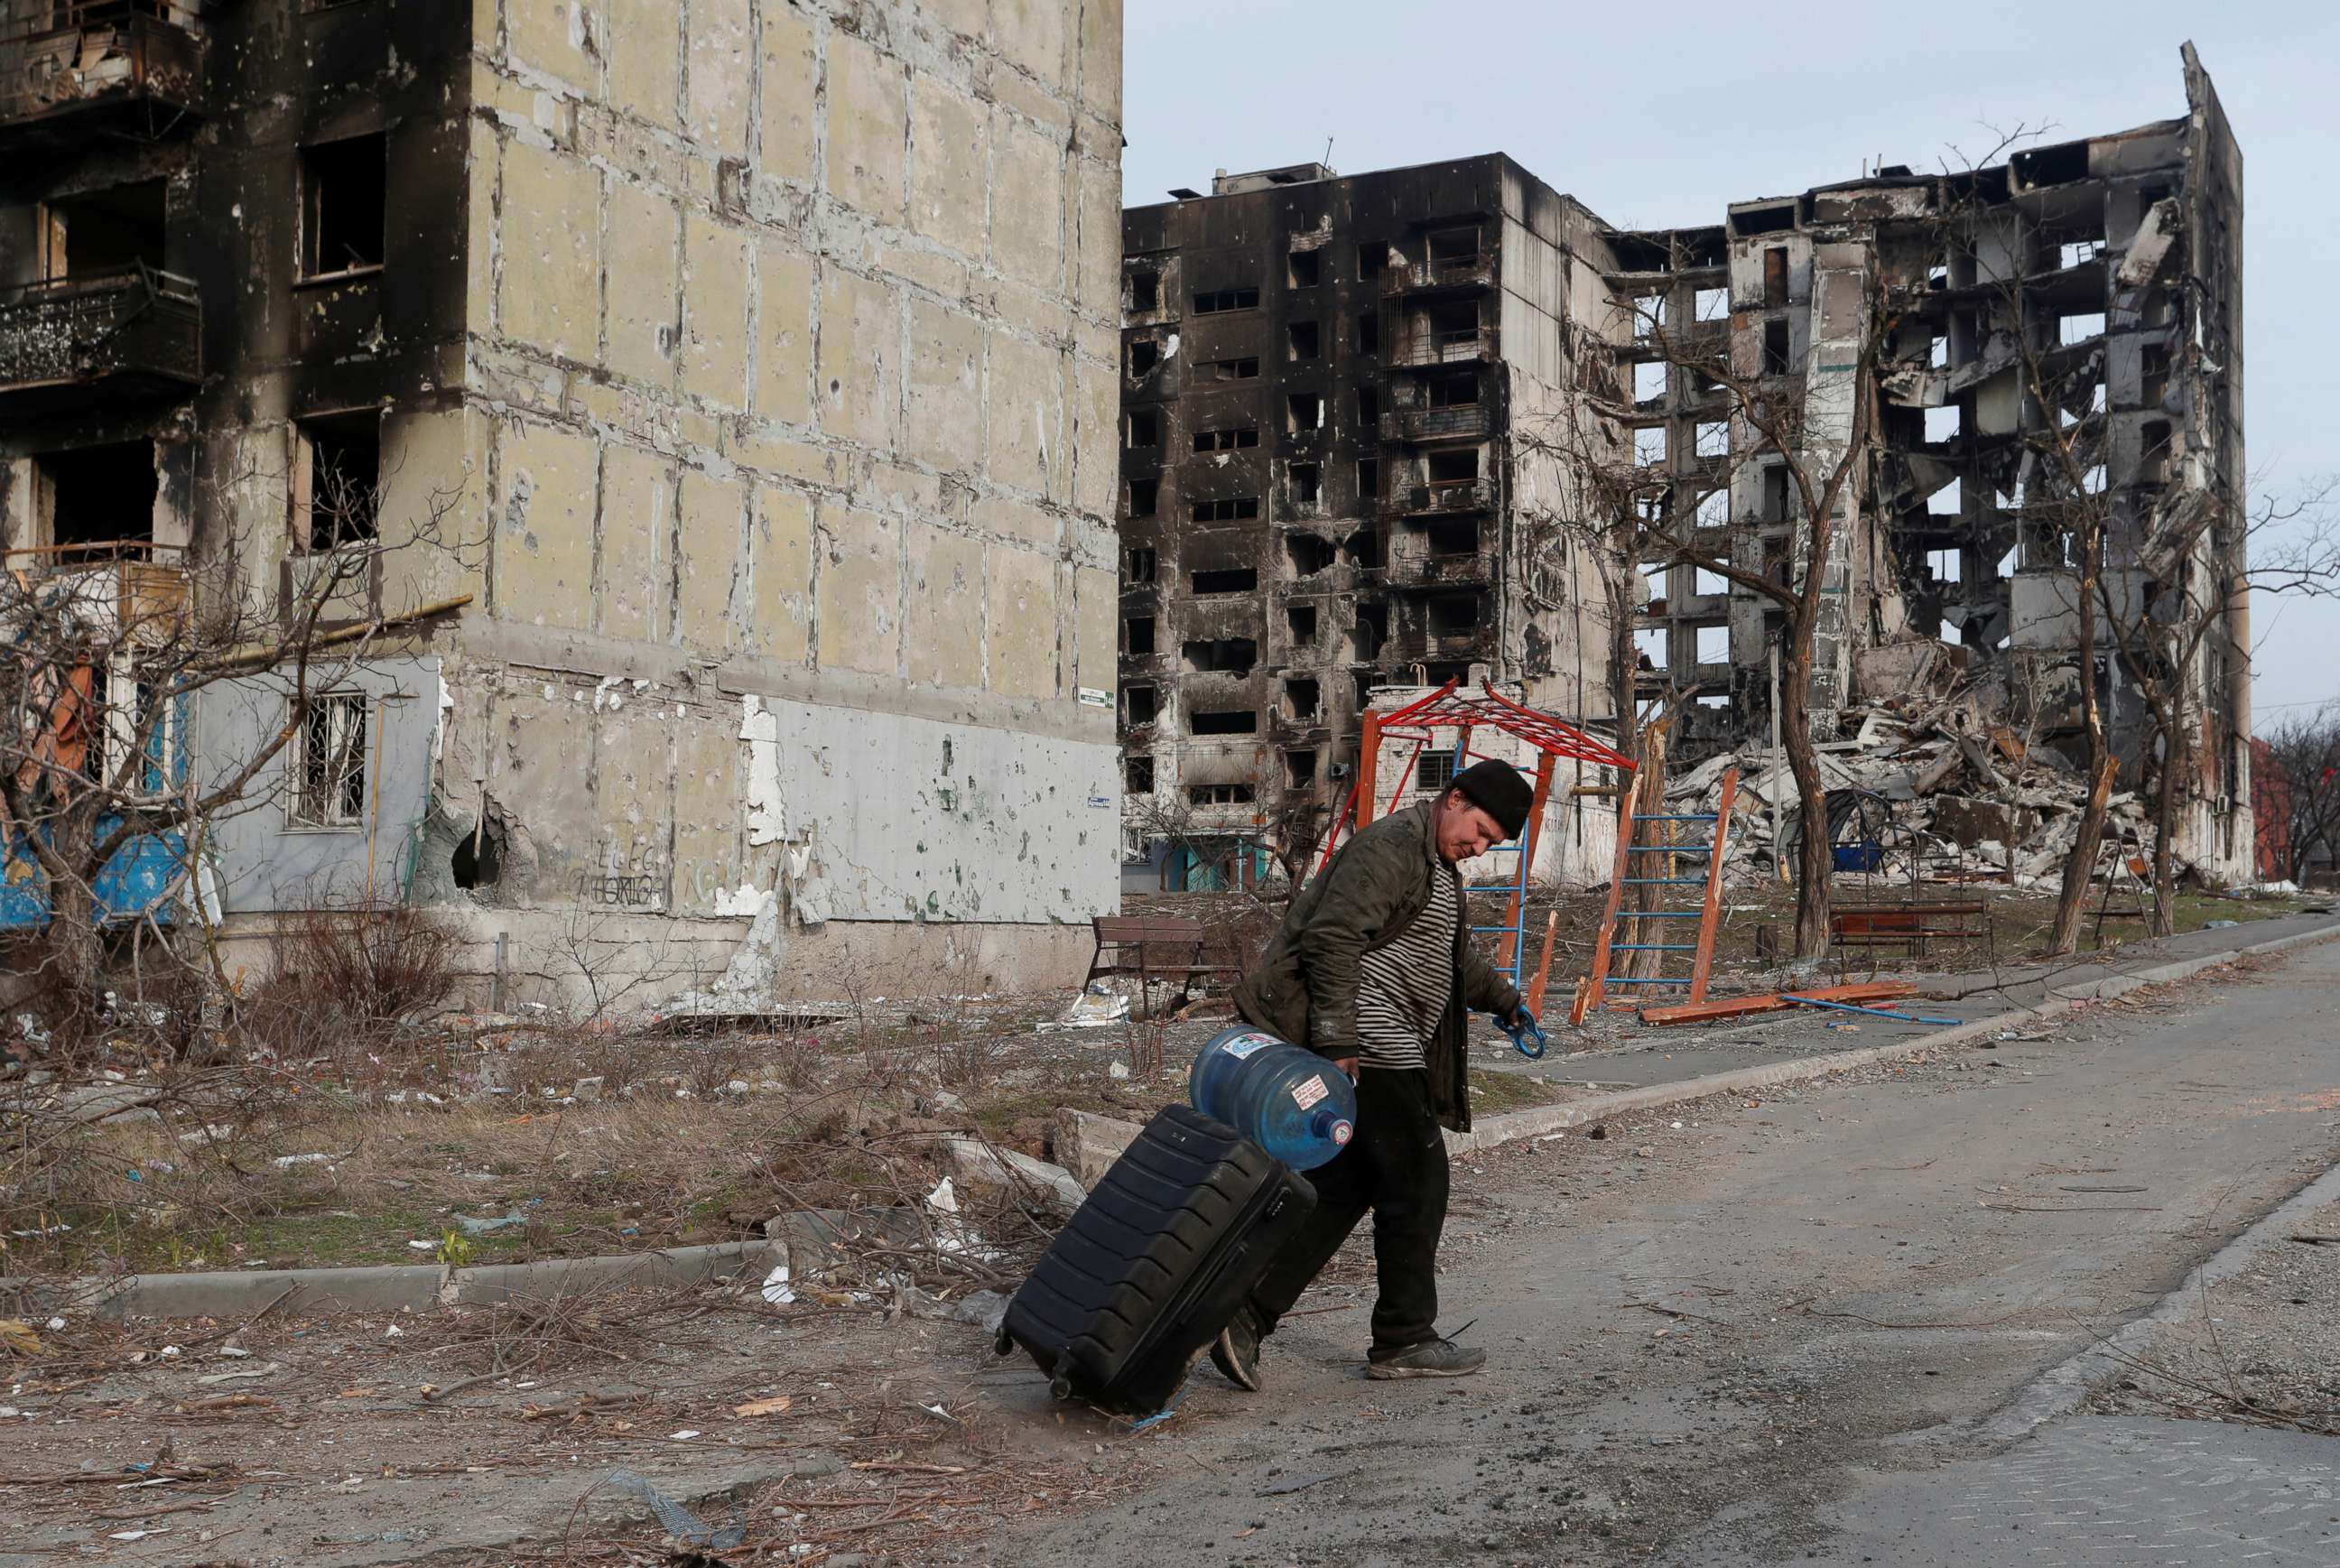 PHOTO: A local resident walks with a suitcase past destroyed apartment buildings in the besieged southern port city of Mariupol, Ukraine, on March 30, 2022, amid Russia's invasion of Ukraine.